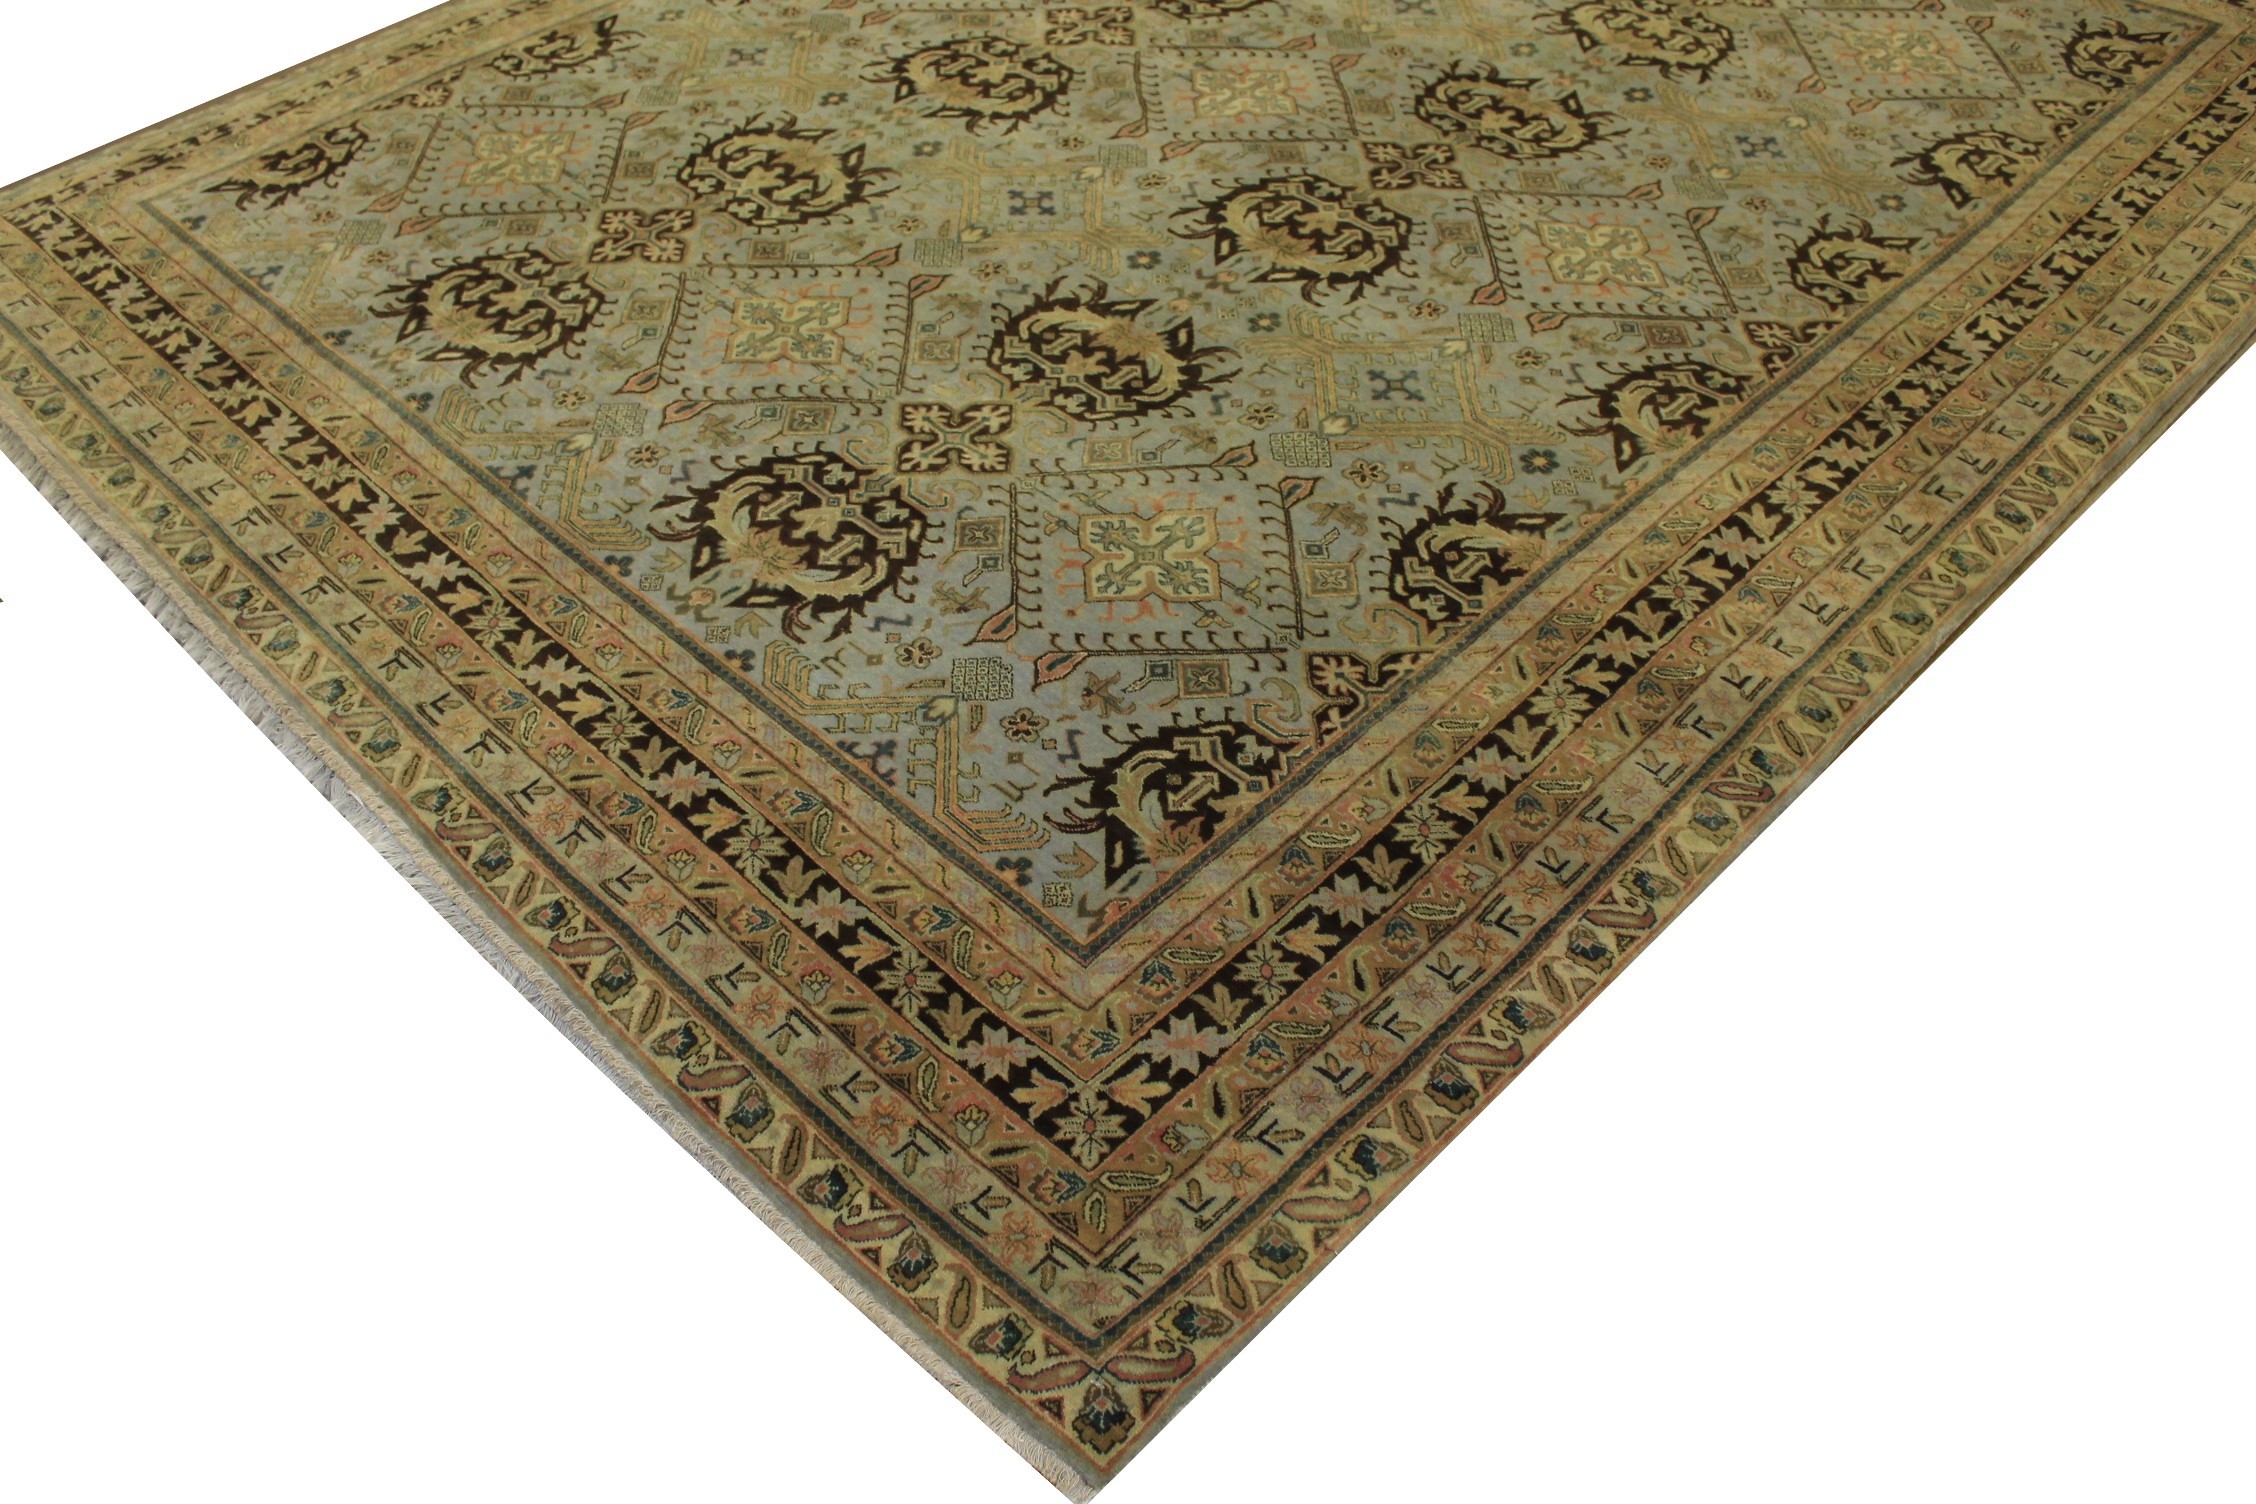 8x10 Antique Revival Hand Knotted Wool Area Rug - MR13418